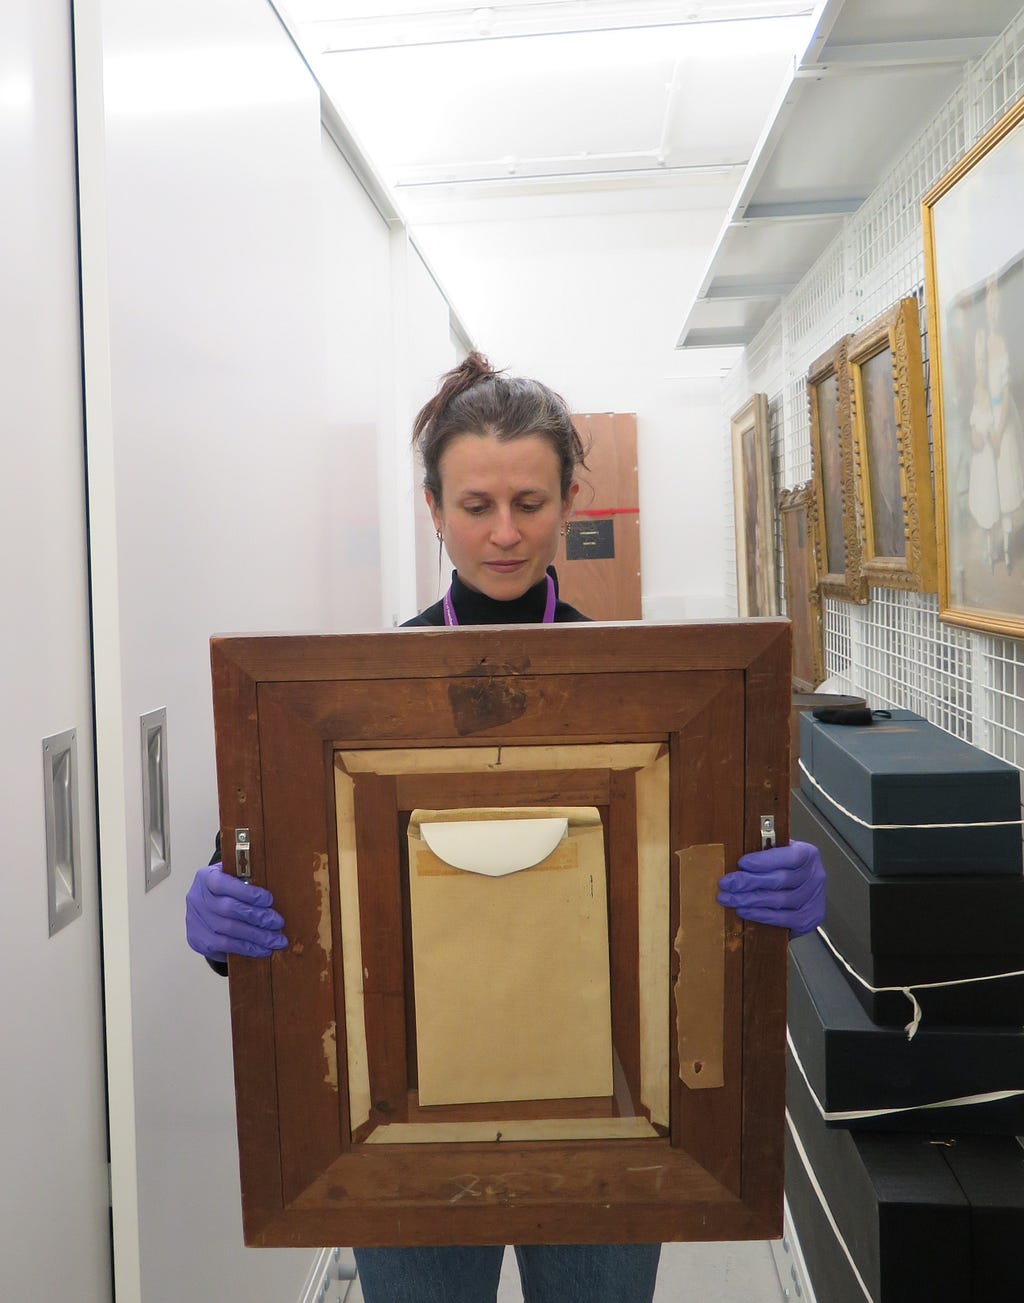 A conservator wearing purple nitrile gloves, carries a framed painting with one hand either side of the painting and the glazed side facing towards her